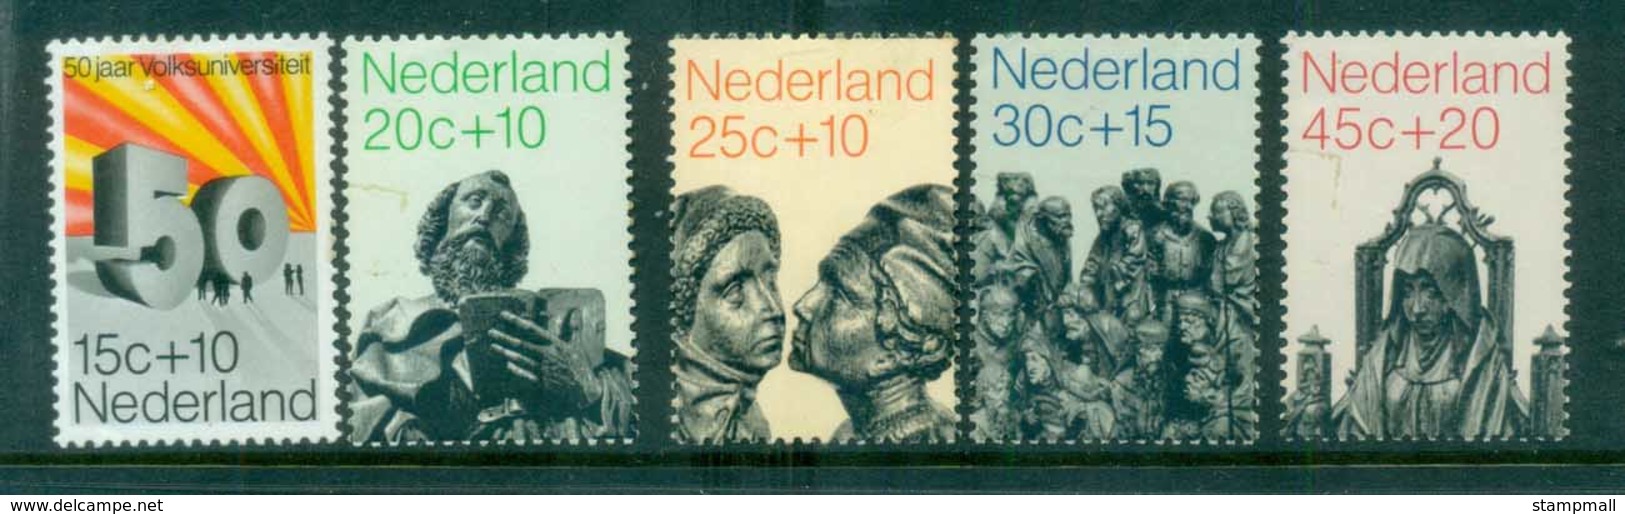 Netherlands 1970 Charity, Universities, Adult Education MLH Lot76561 - Unclassified